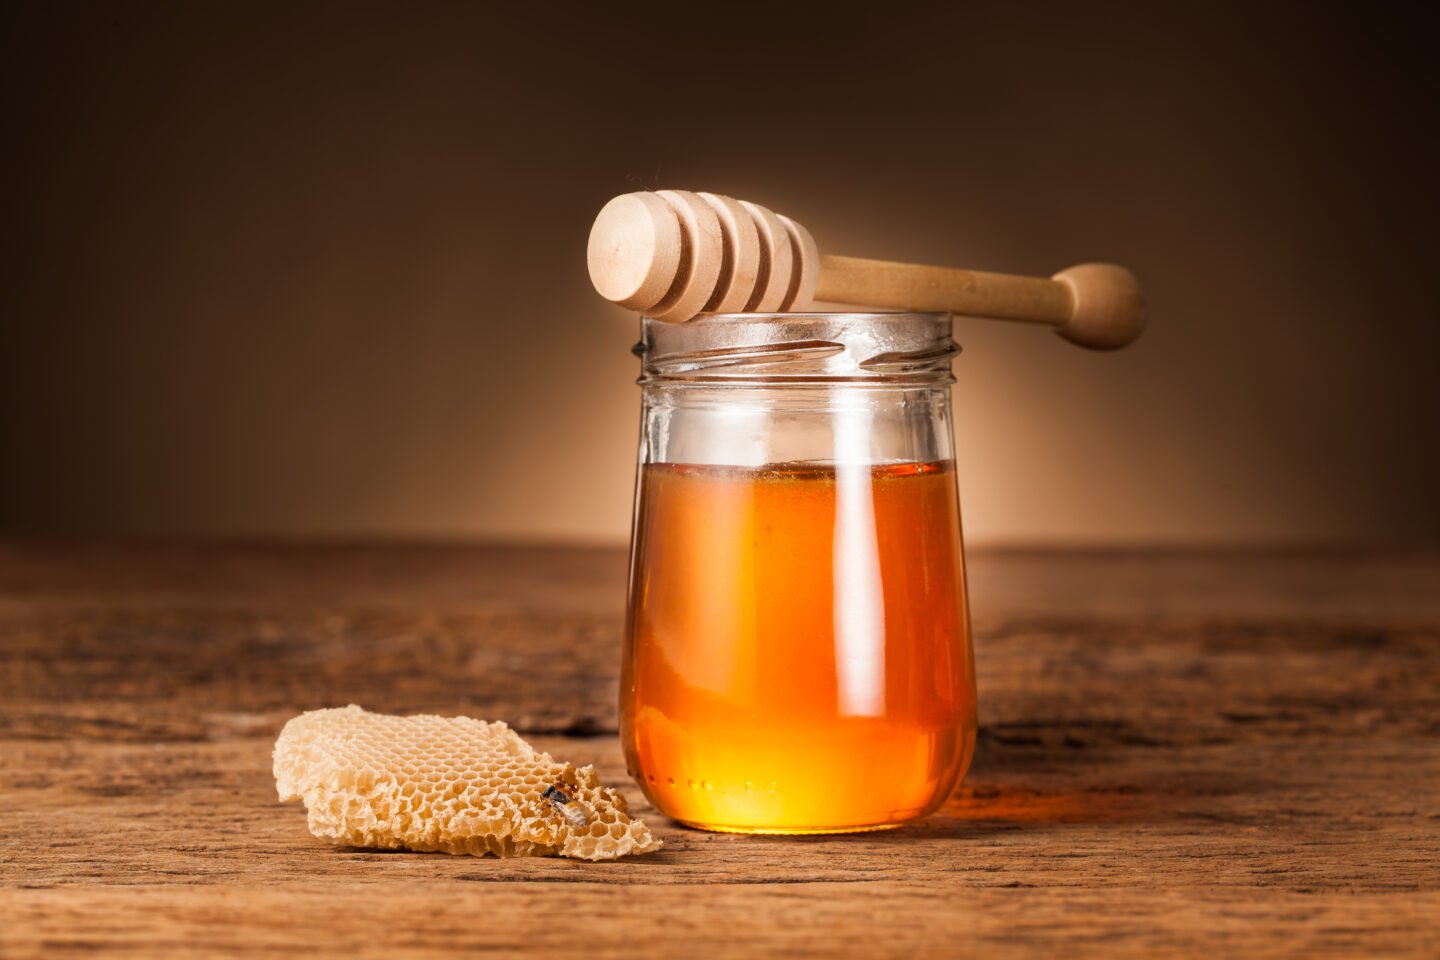 Honey,Pot,Preserved,With,Honeycomb,On,Wood,Background